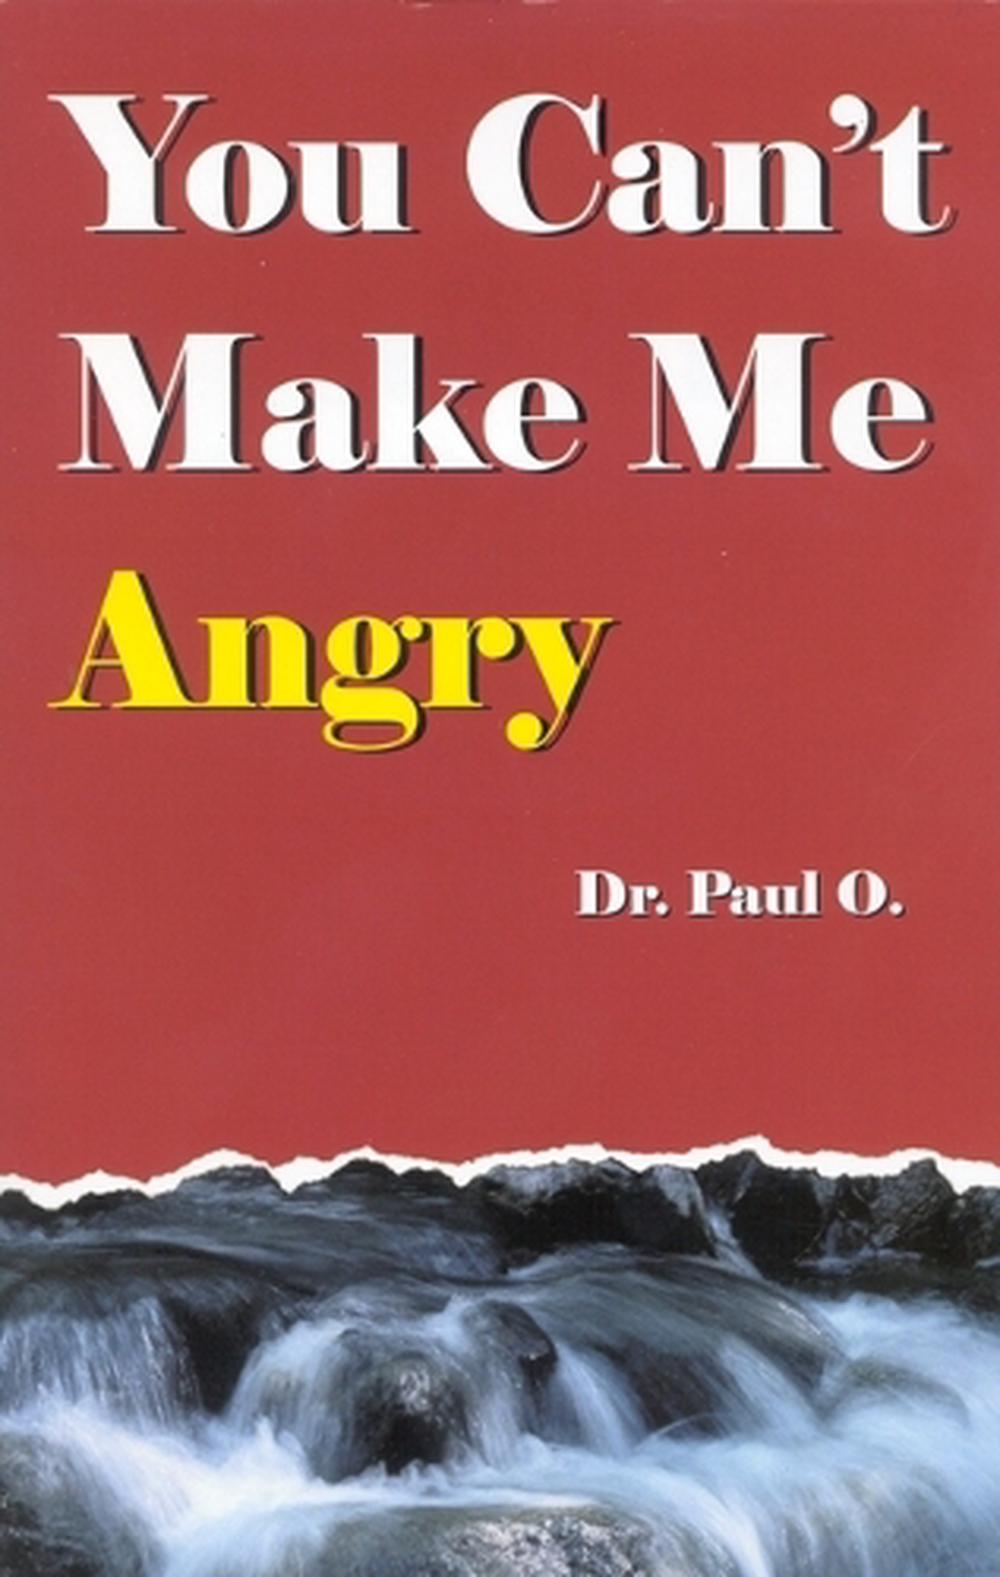 You Can't Make Me Angry by Dr Paul O., Paperback, 9780965967211 Buy